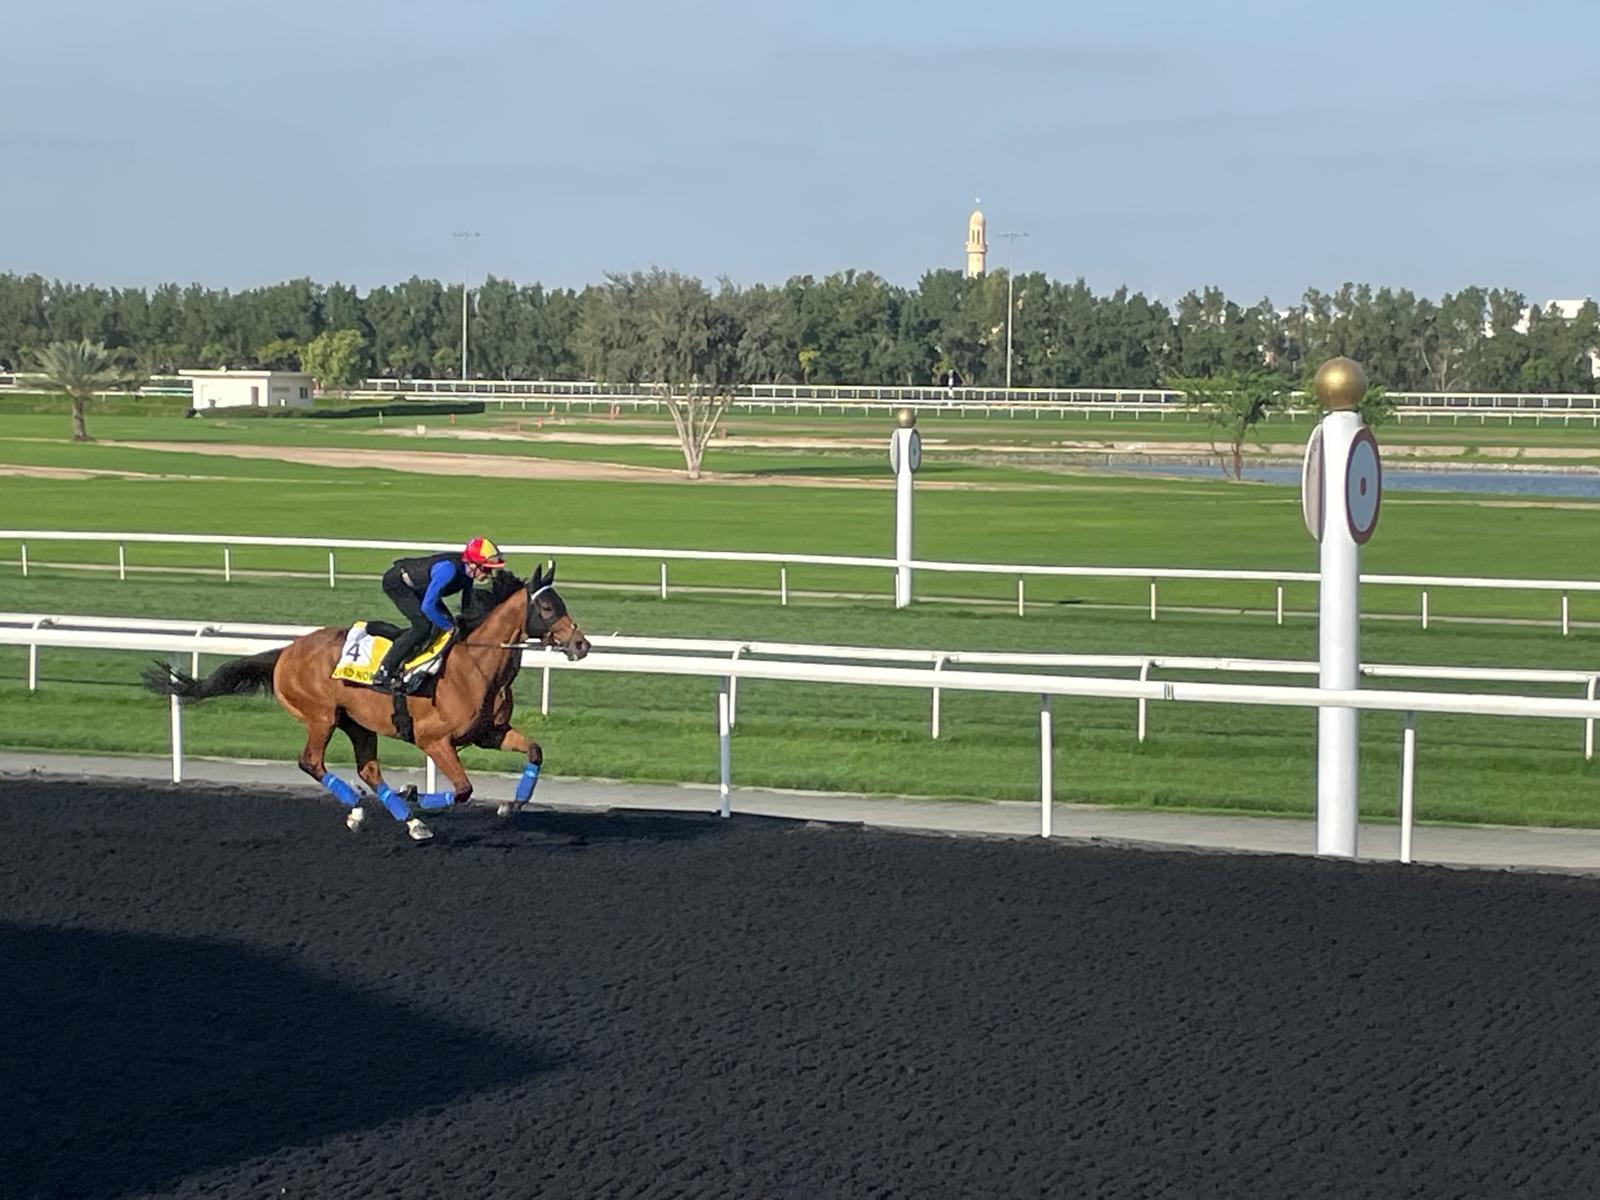 Lord North and Frankie Dettori on track in Meydan